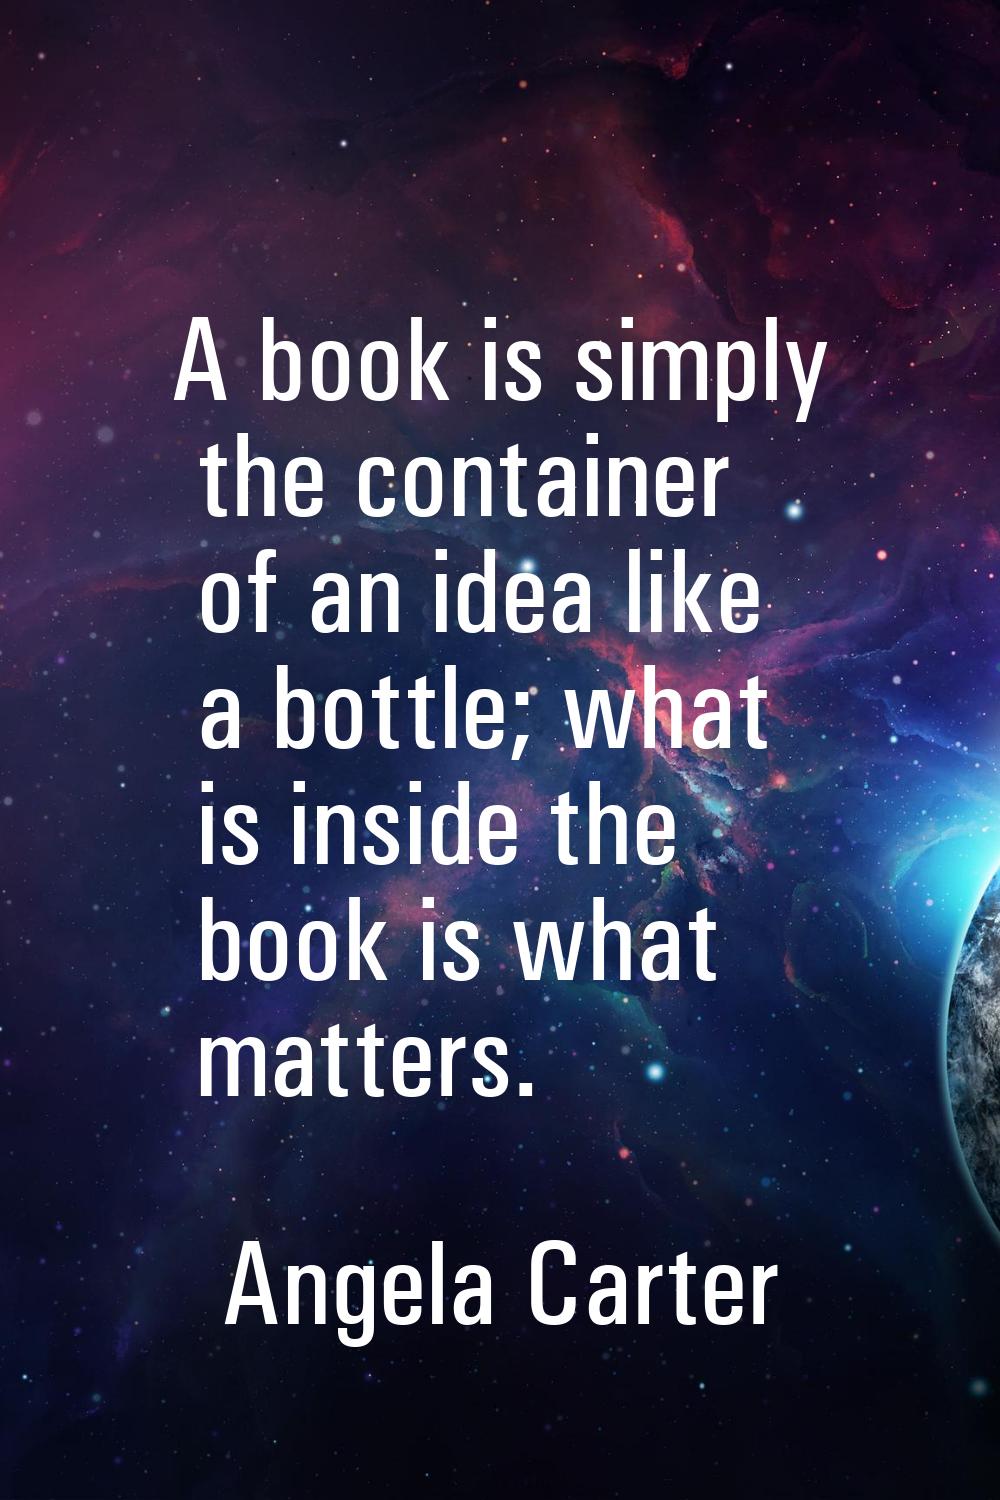 A book is simply the container of an idea like a bottle; what is inside the book is what matters.